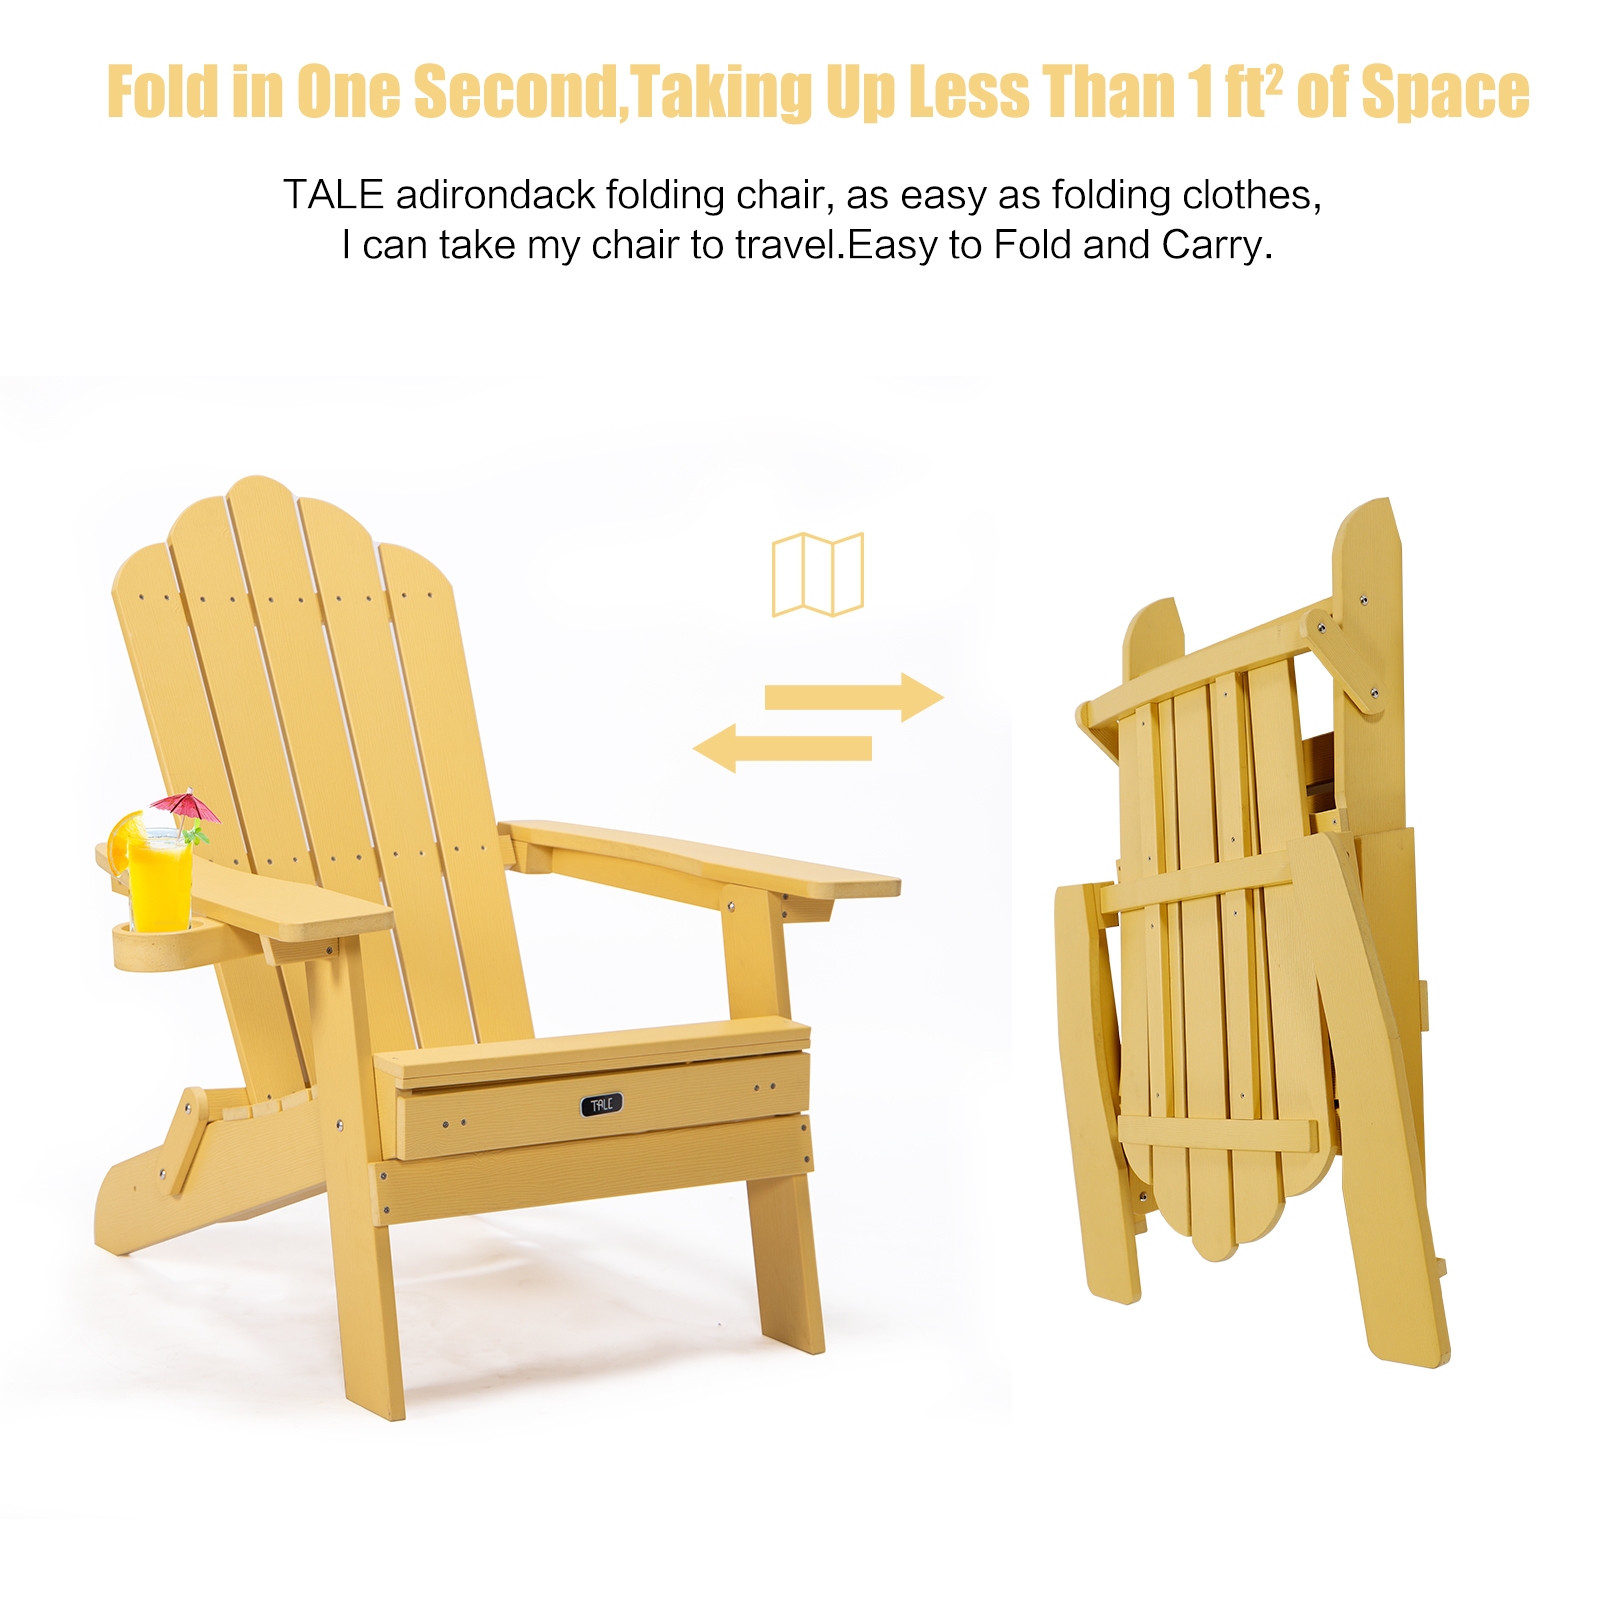 Wood Outdoor Adirondack Chair, Adirondack Chairs Folding Outdoor Patio Chairs, Wooden Accent Lounge Furniture for Yard, Patio - image 5 of 10